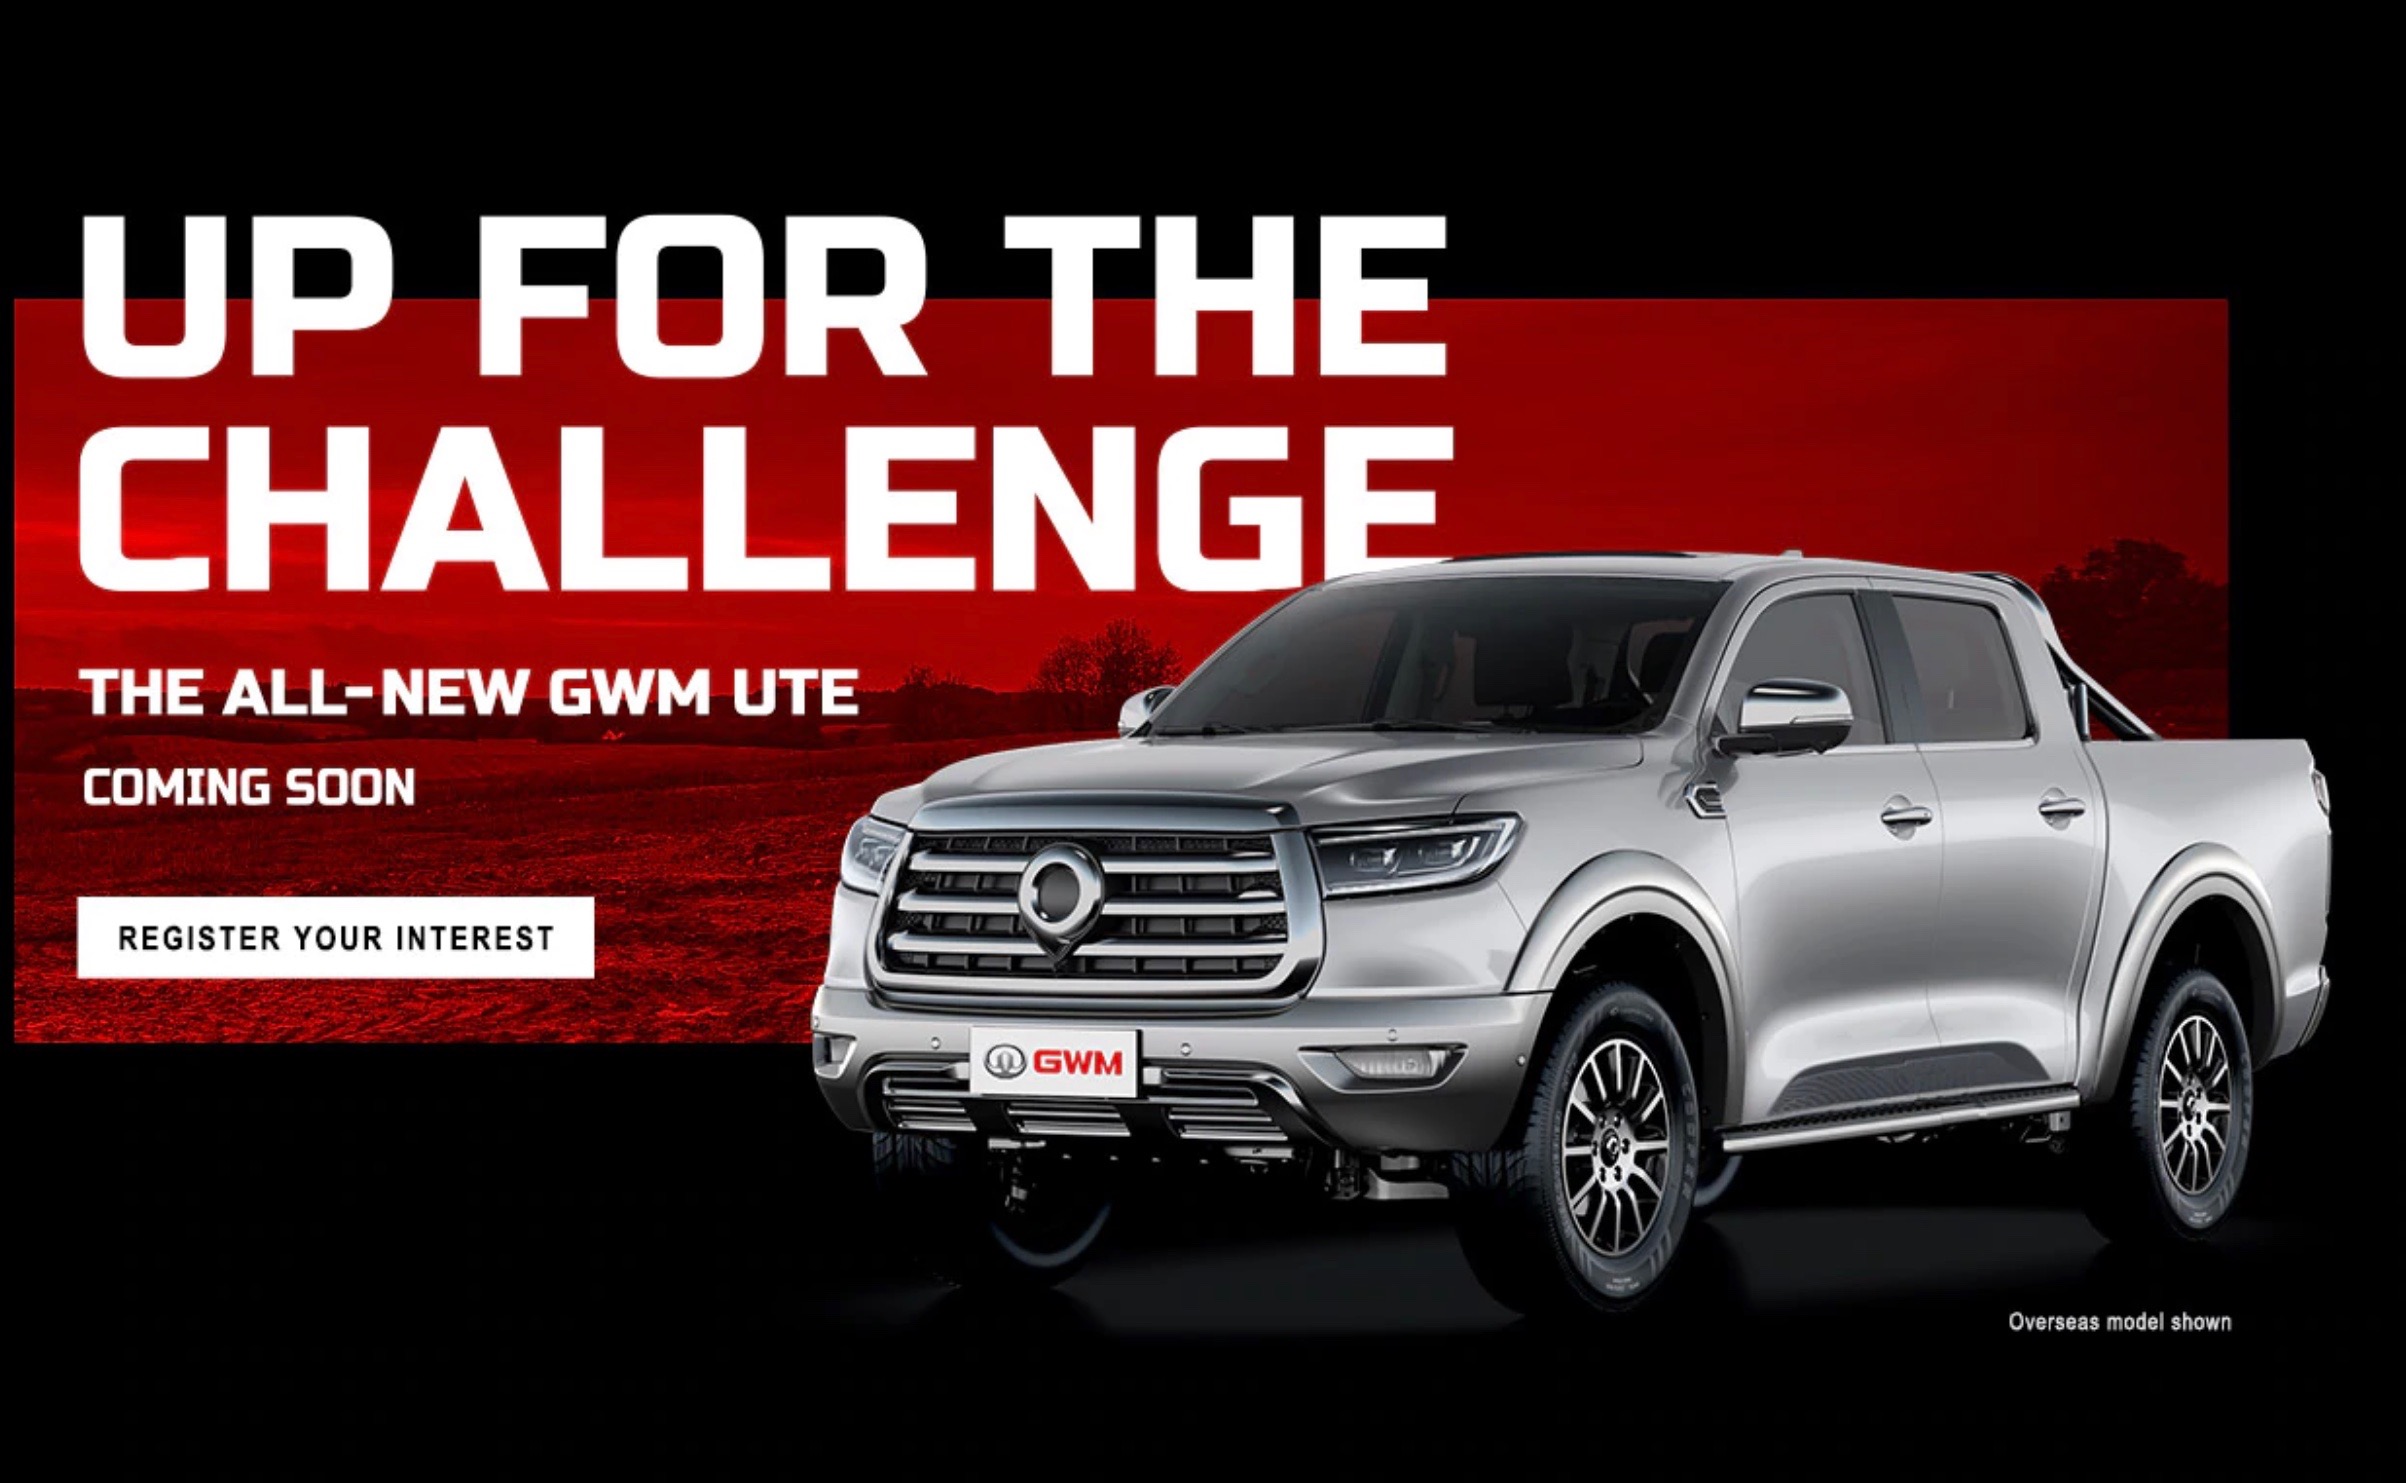 All-new GWM Cannon dual-cab ute confirmed for Australia